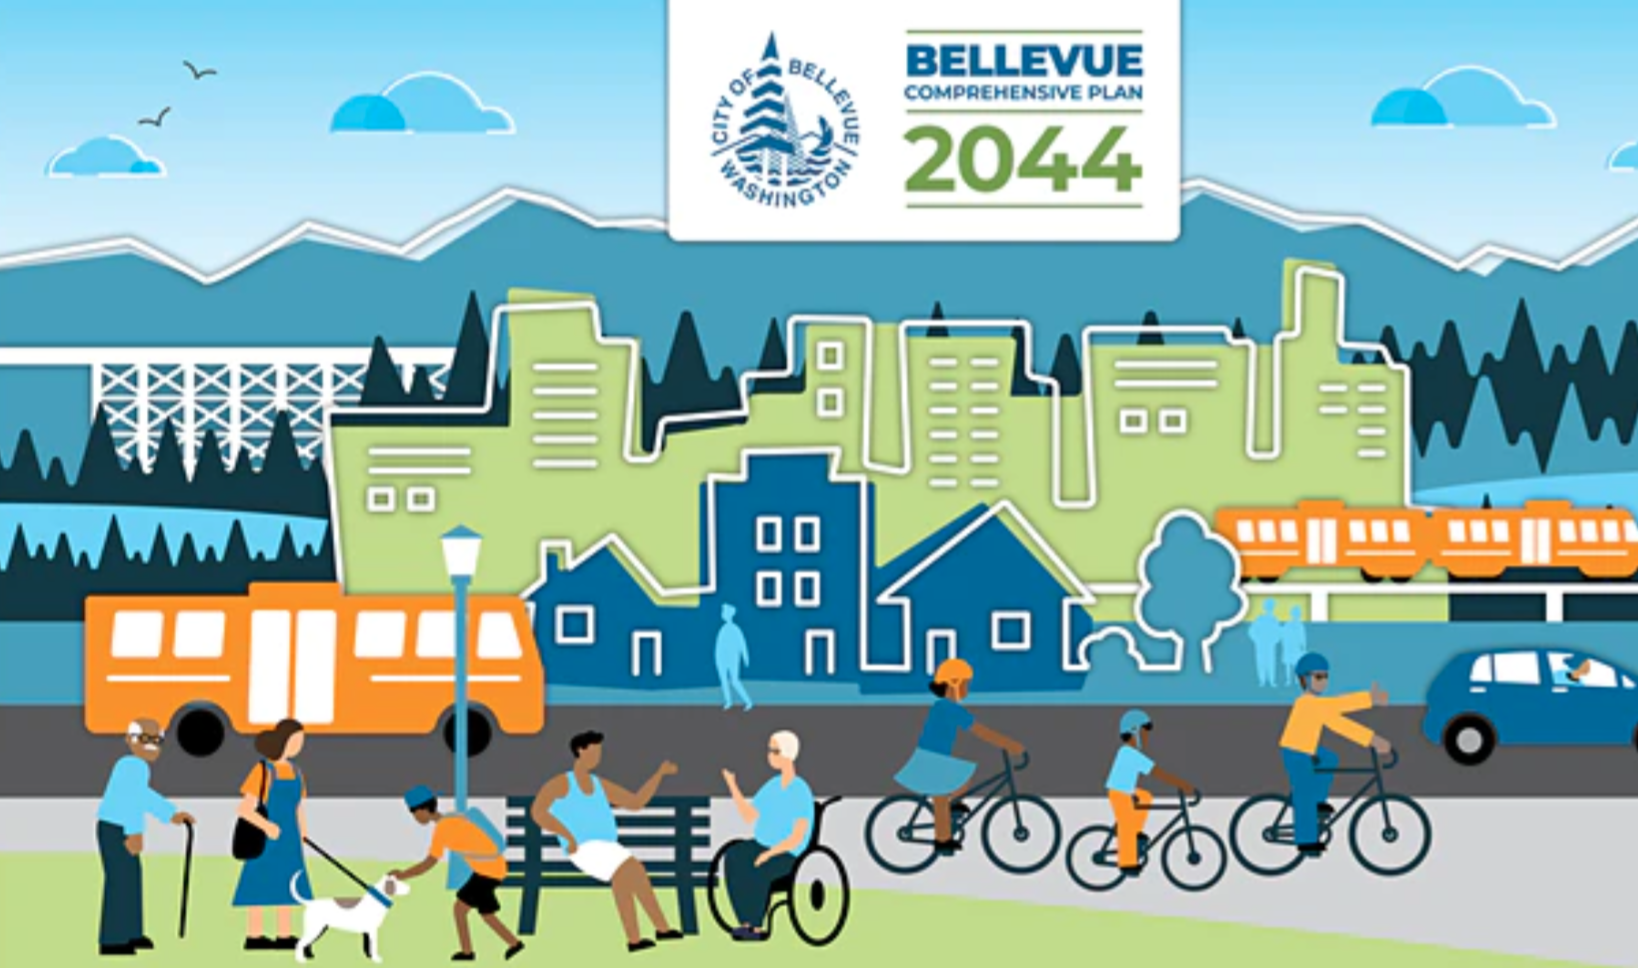 City of Bellevue Plans for Next 20 Years with Workshops Open to Community